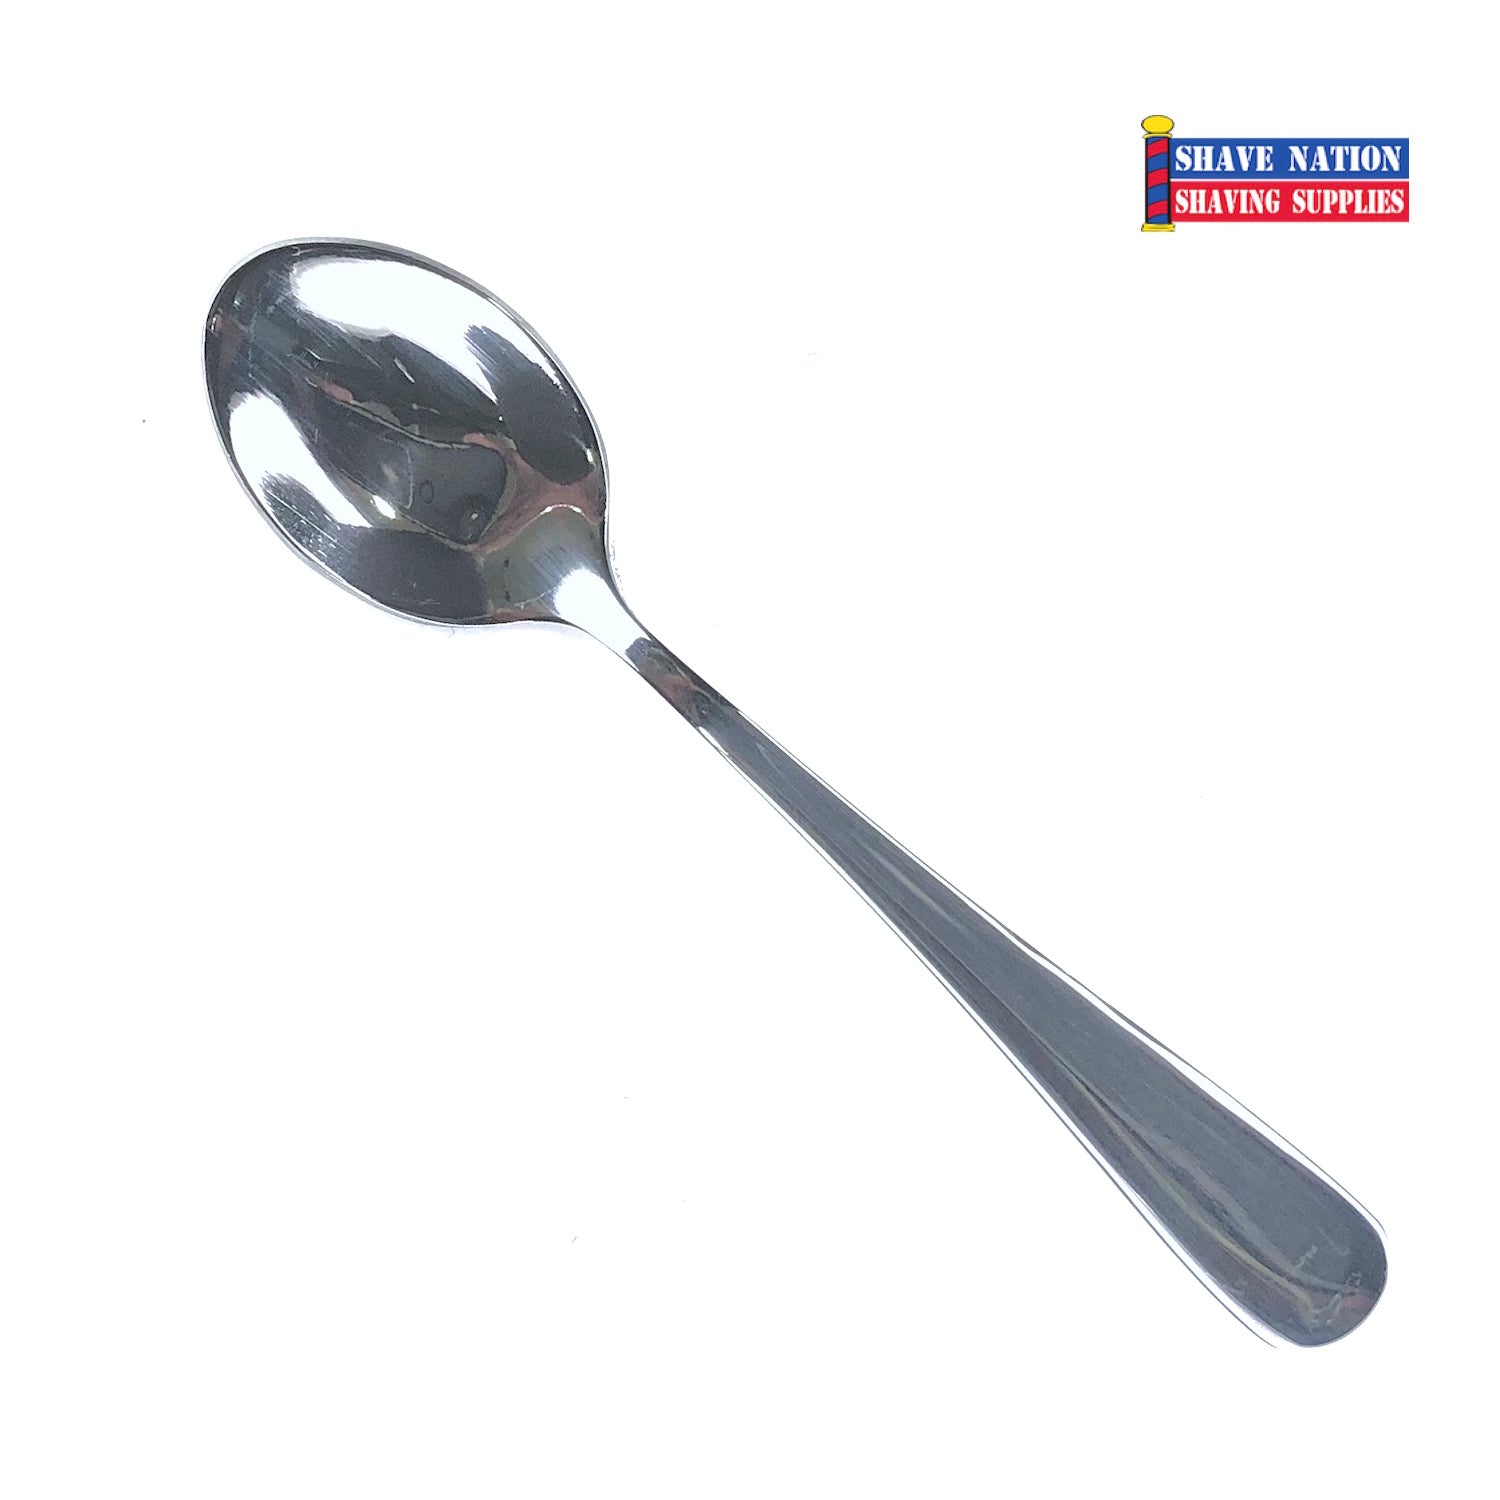 https://shavenation.com/cdn/shop/products/shaving-cream-soap-mini-scoop-spoon-stainless-steel-silver-shave-nation.jpg?v=1608048767